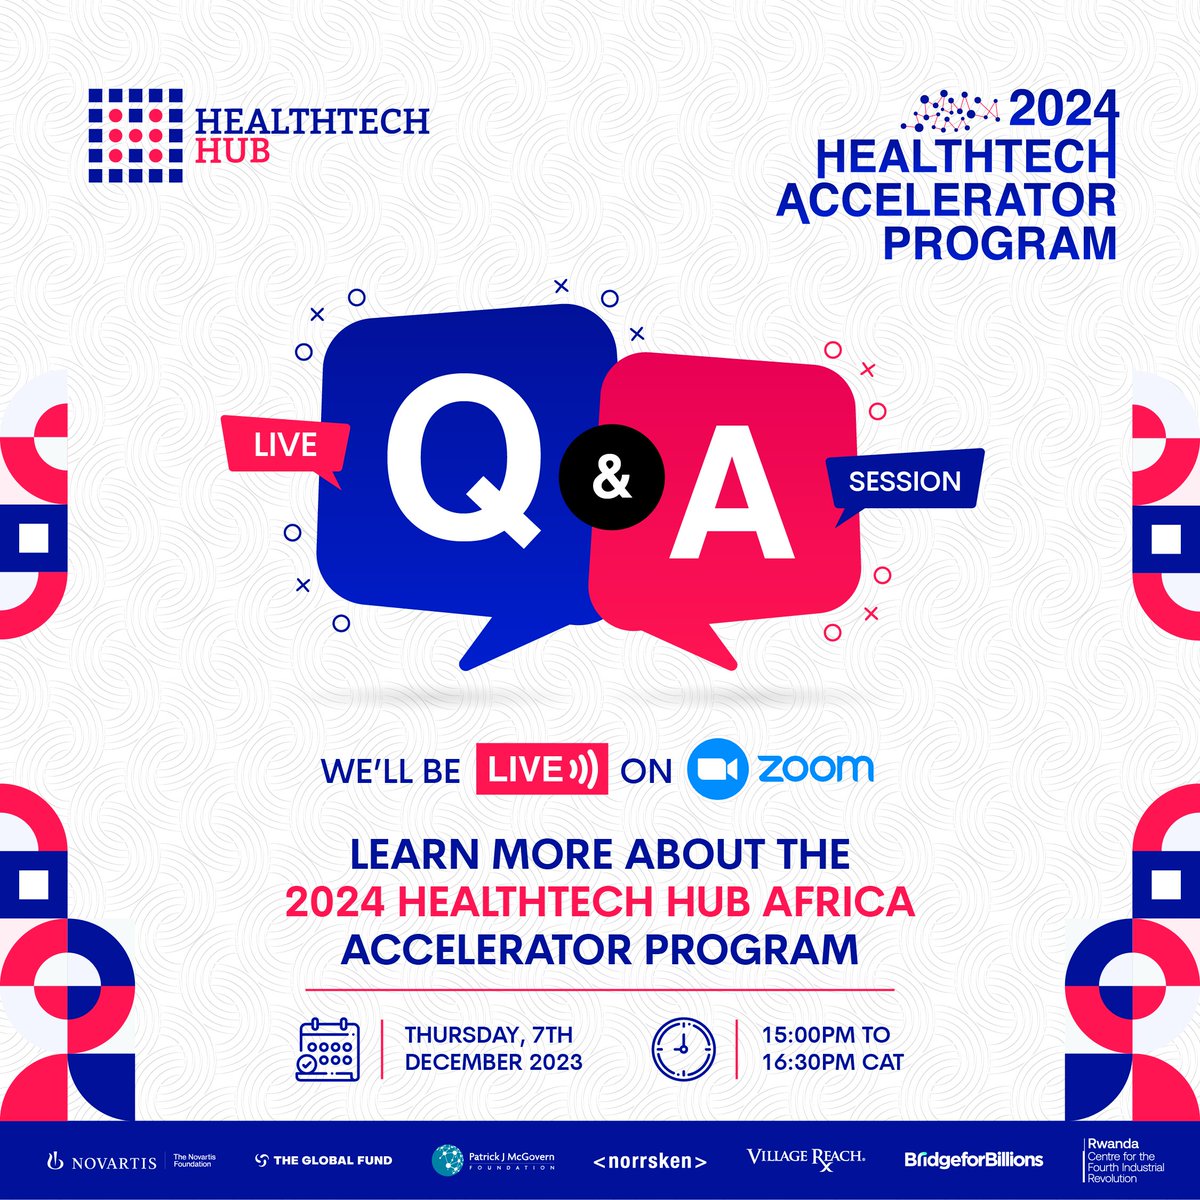 Join our live webinar on Dec 7, 2023, at 15:00 CAT for deep insights into the 2024 Accelerator Program. Secure your spot by registering: bit.ly/3uBiwGU We actively support female team compositions. Questions? info@thehealthtech.org #HTHA2024 #AcceleratorProgram #Africa